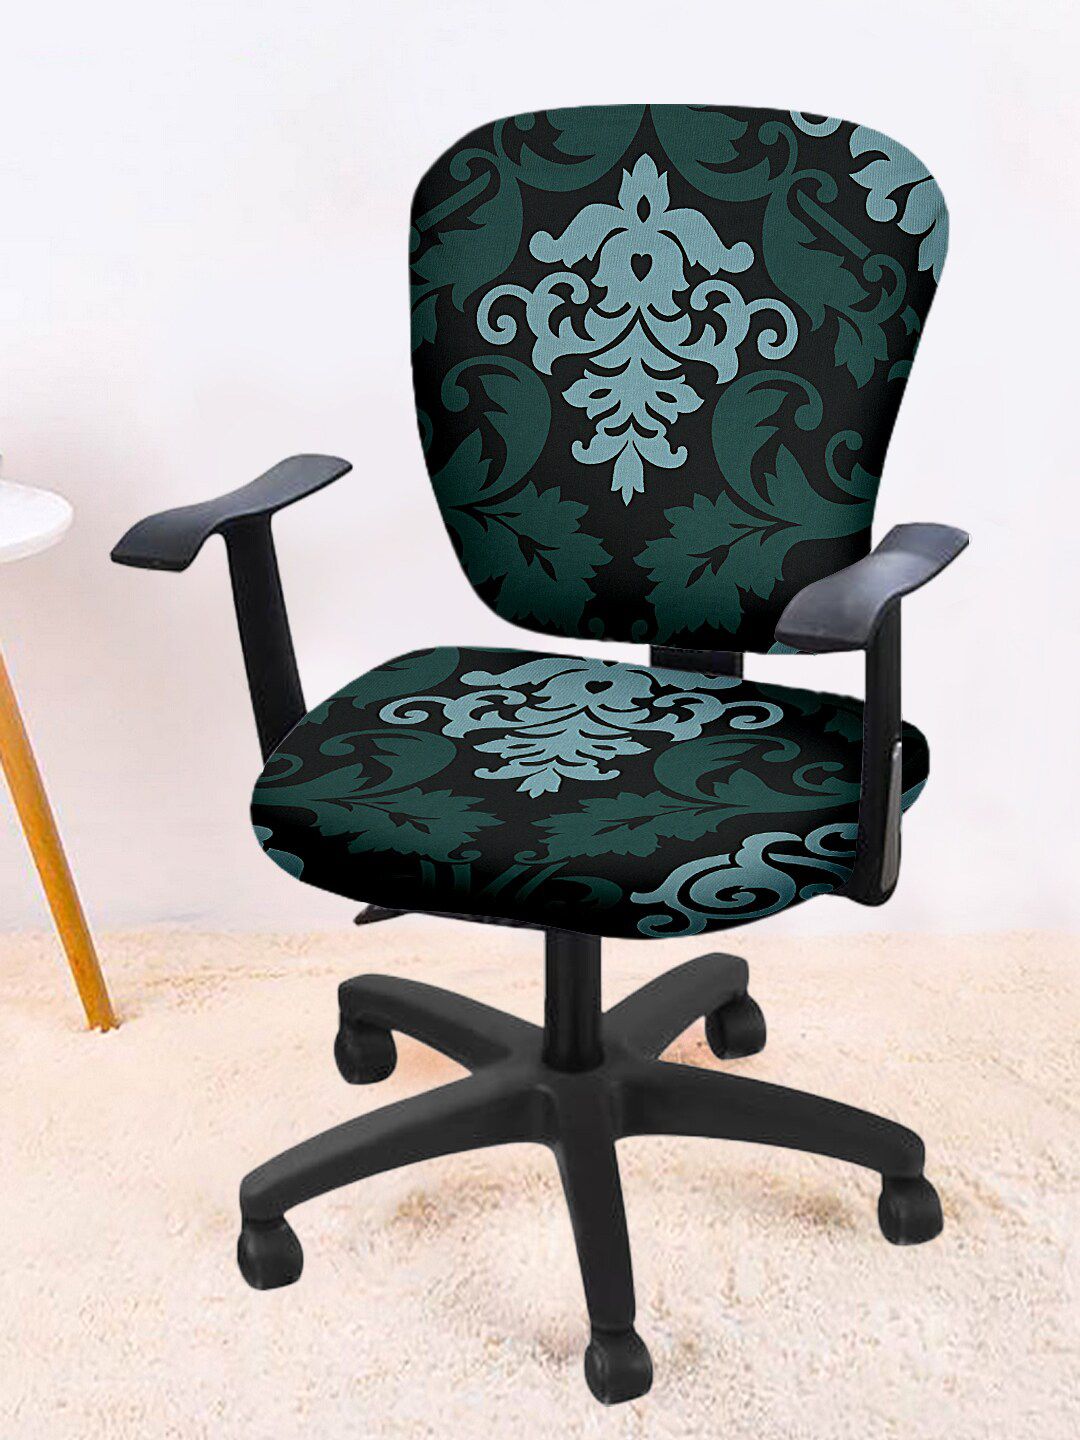 Cortina Set Of 8 Black & Green Printed Chair Covers Price in India